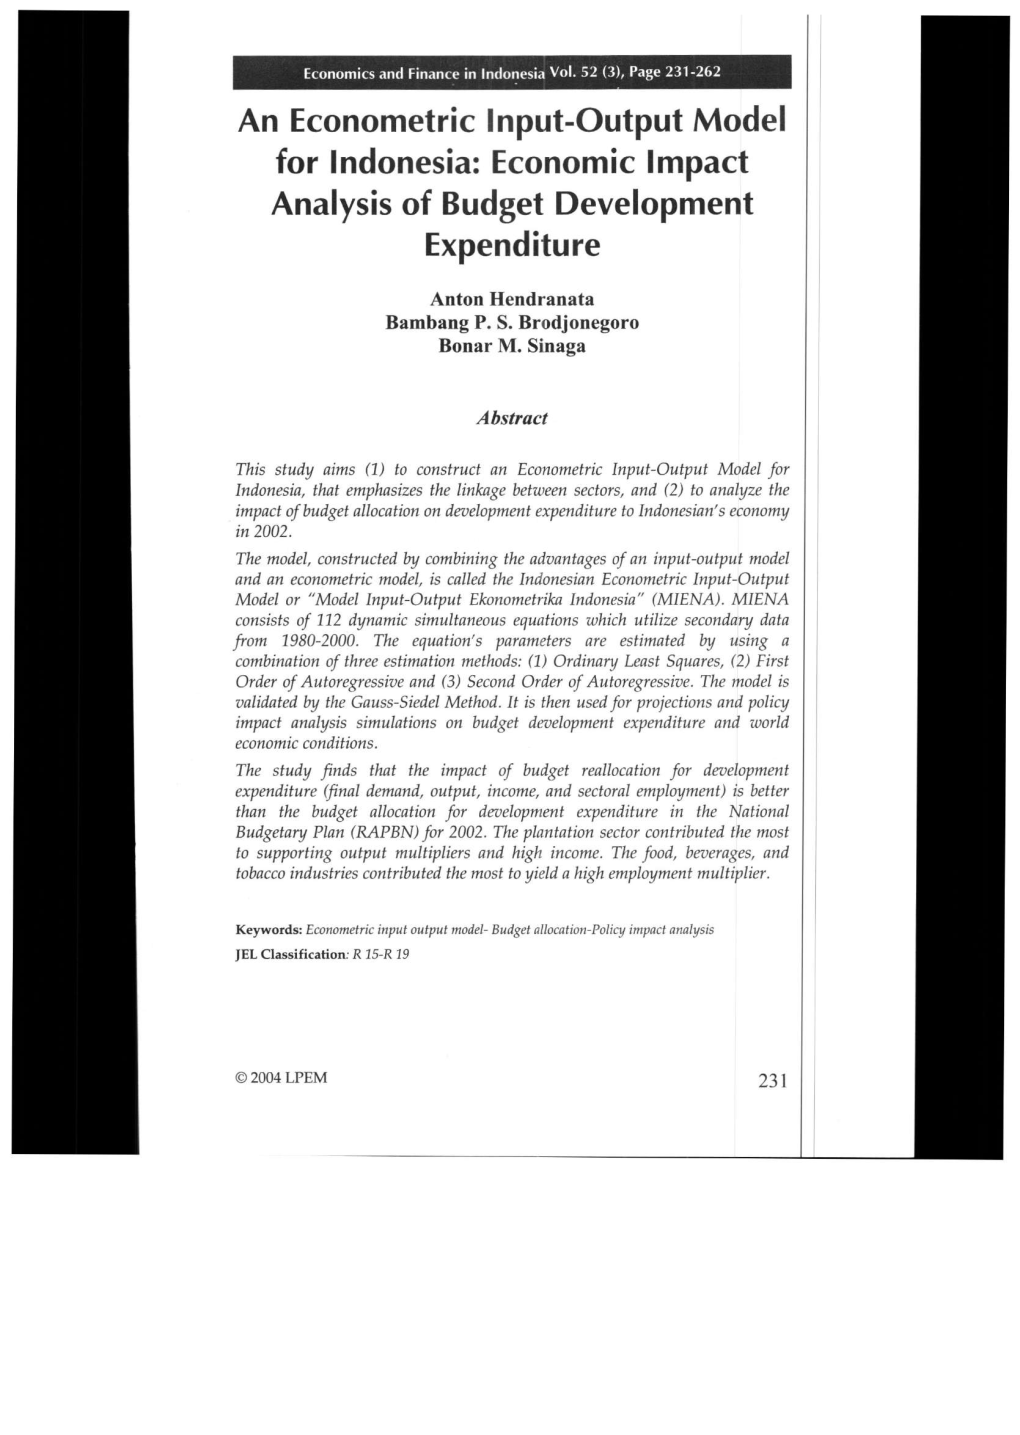 An Econometric Input-Output Model for Indonesia: Economic Impact Analysis of Budget Development Expenditure